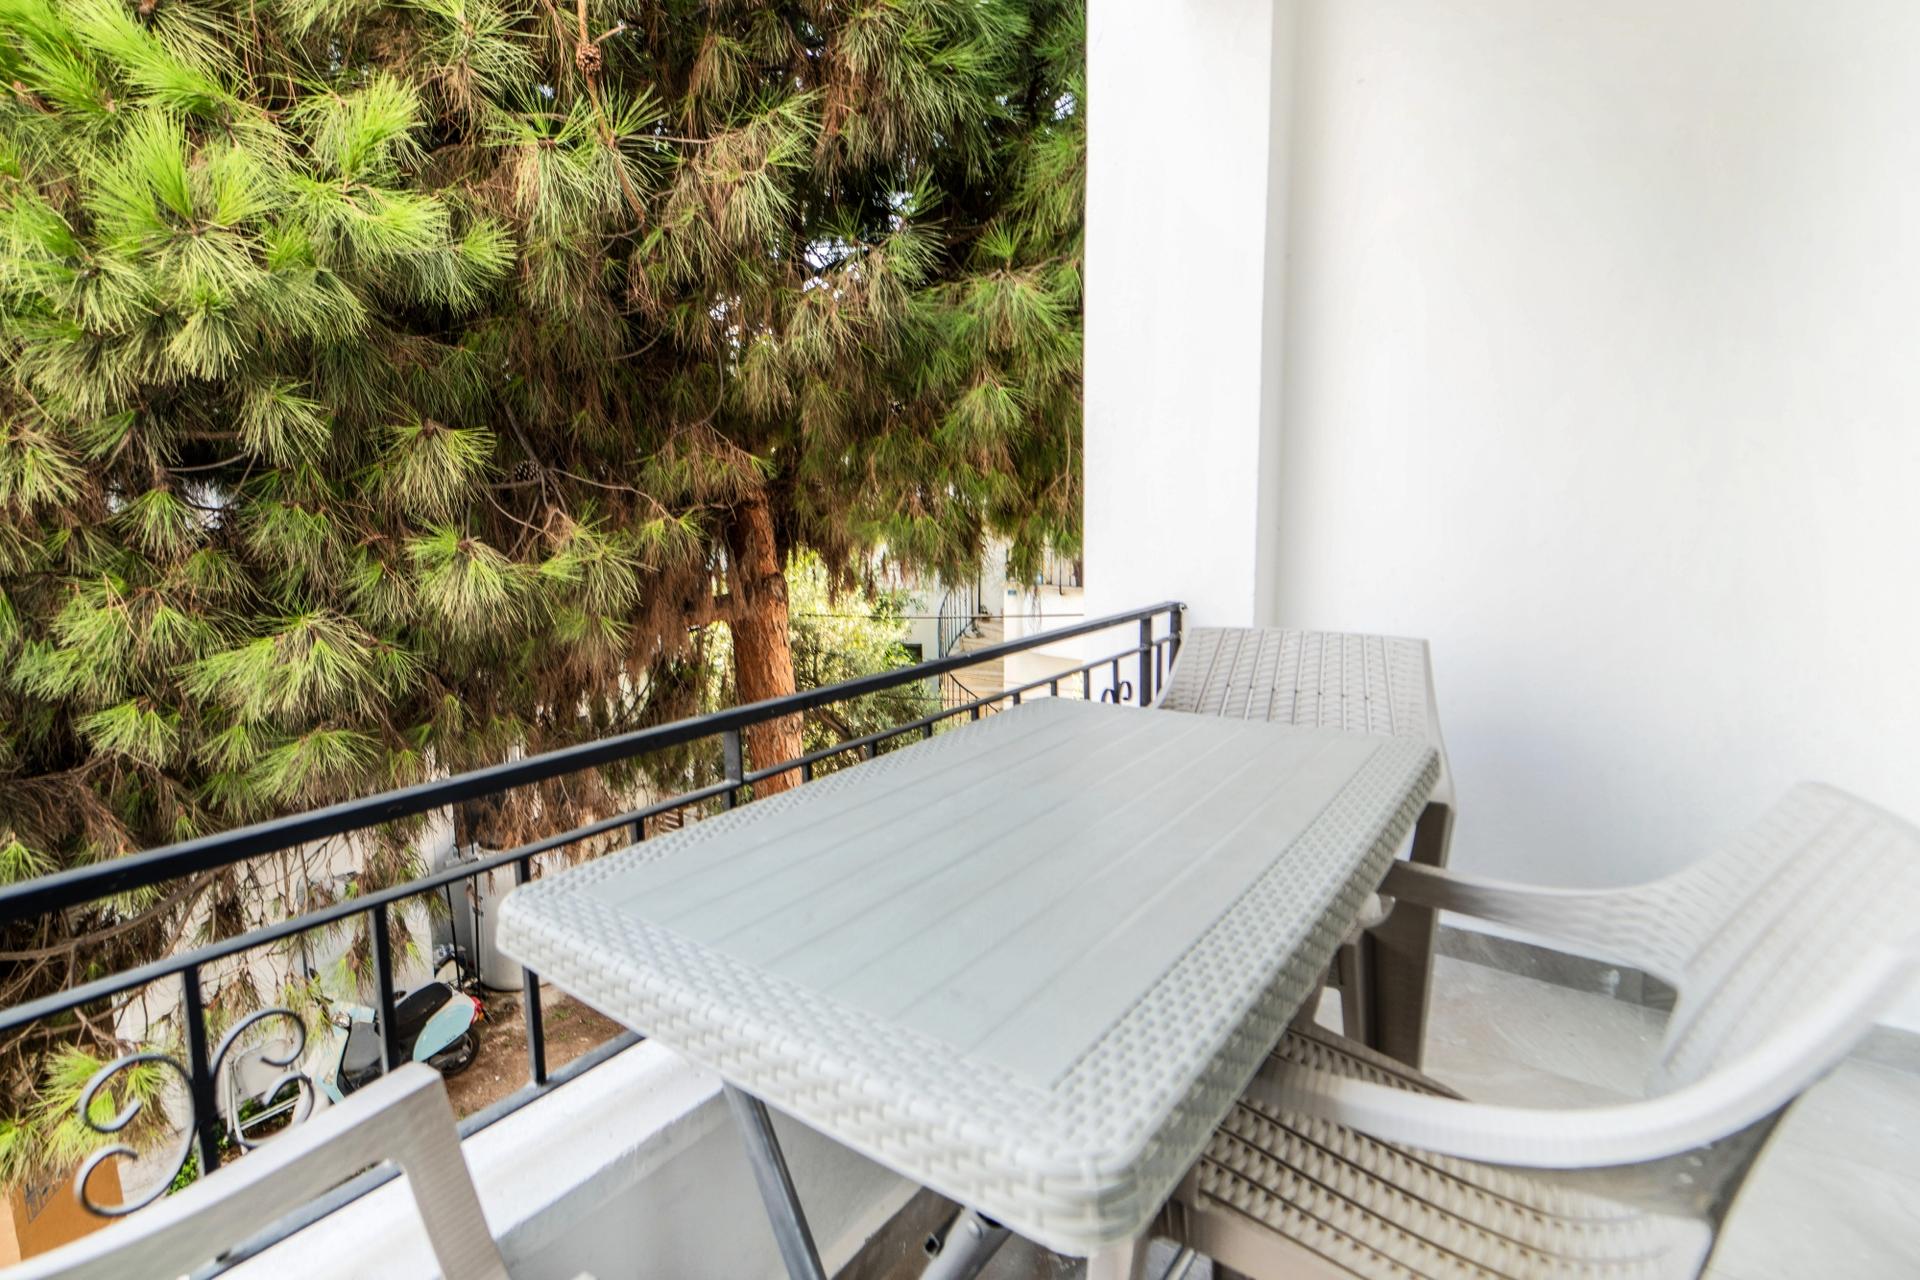 Shake off the day's fatigue on your balcony with a nature view!